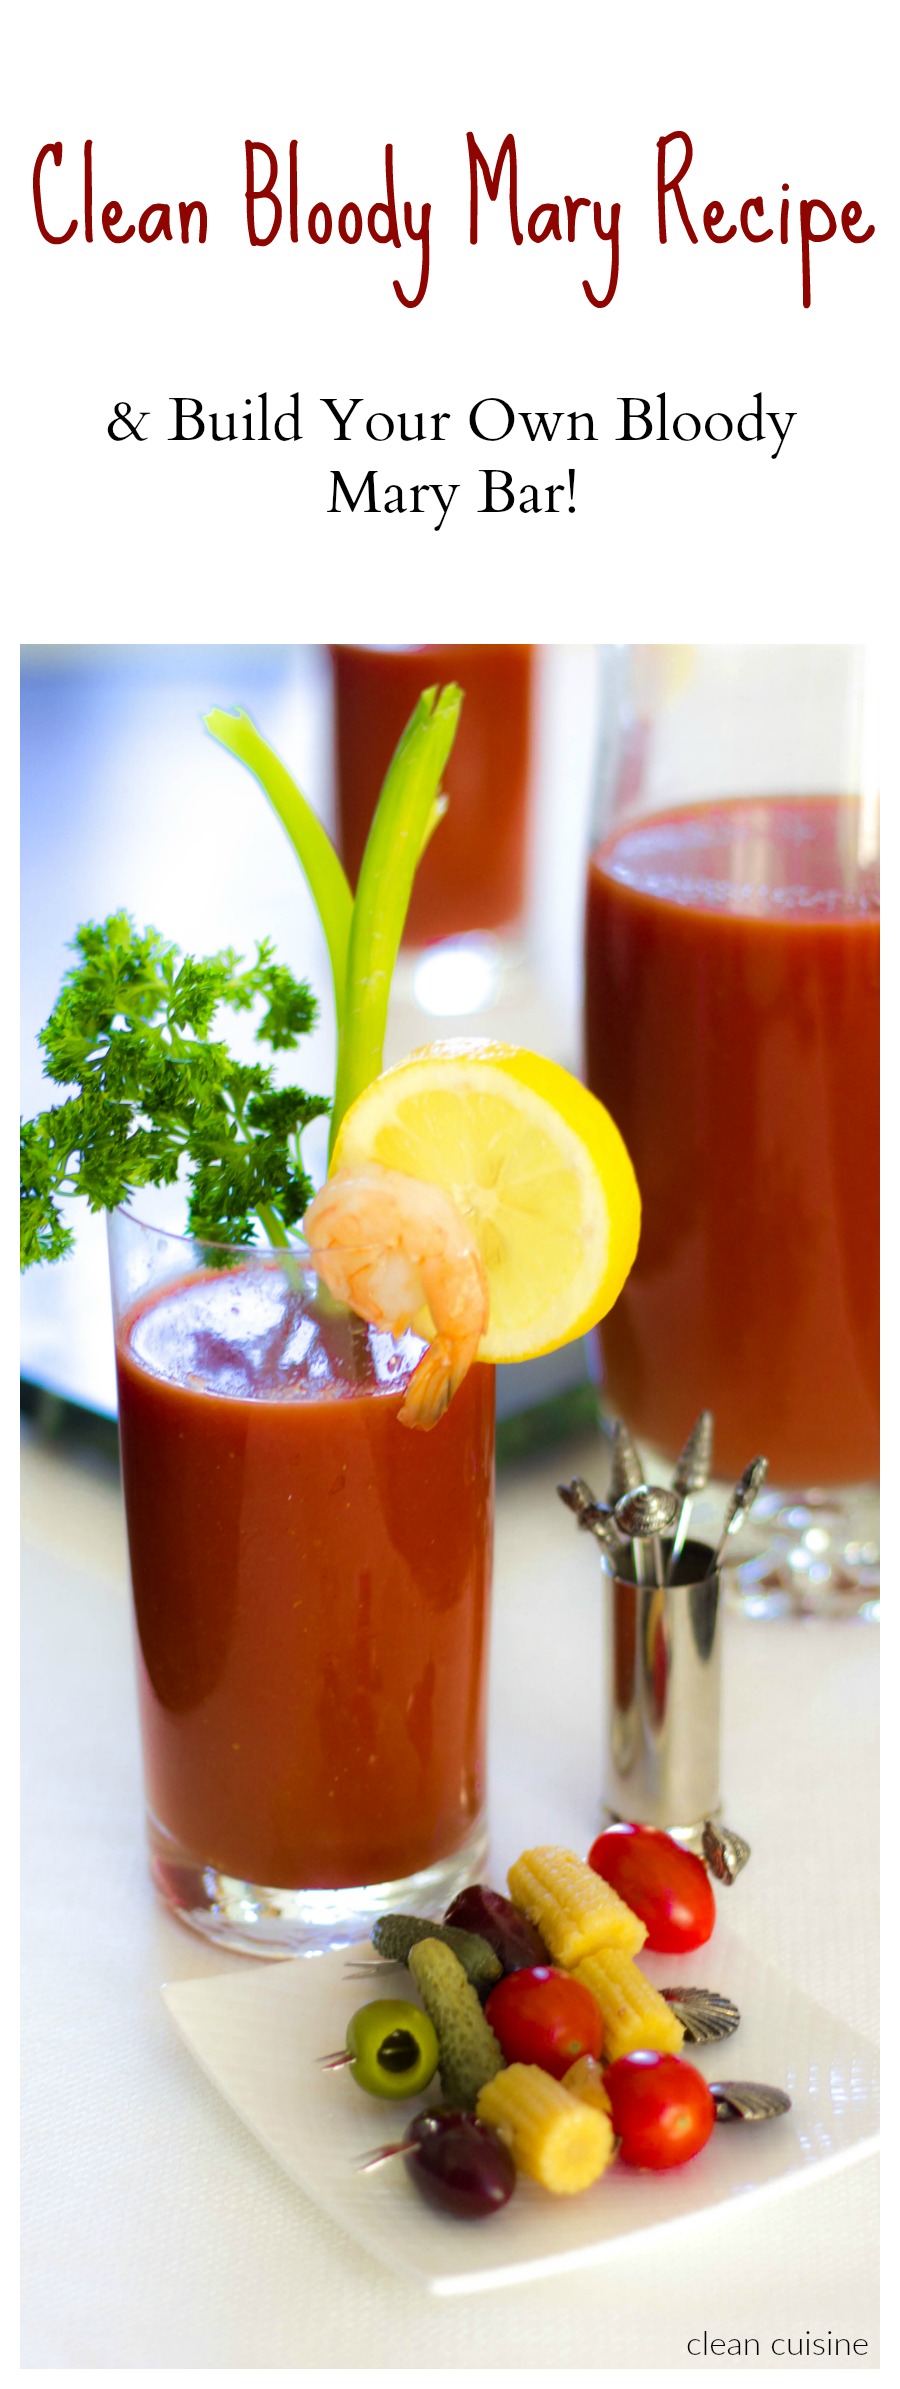 Clean Bloody Mary Mix Recipe And A Build Your Own Bloody Mary Bar,Severe Macaw Vs Blue And Gold